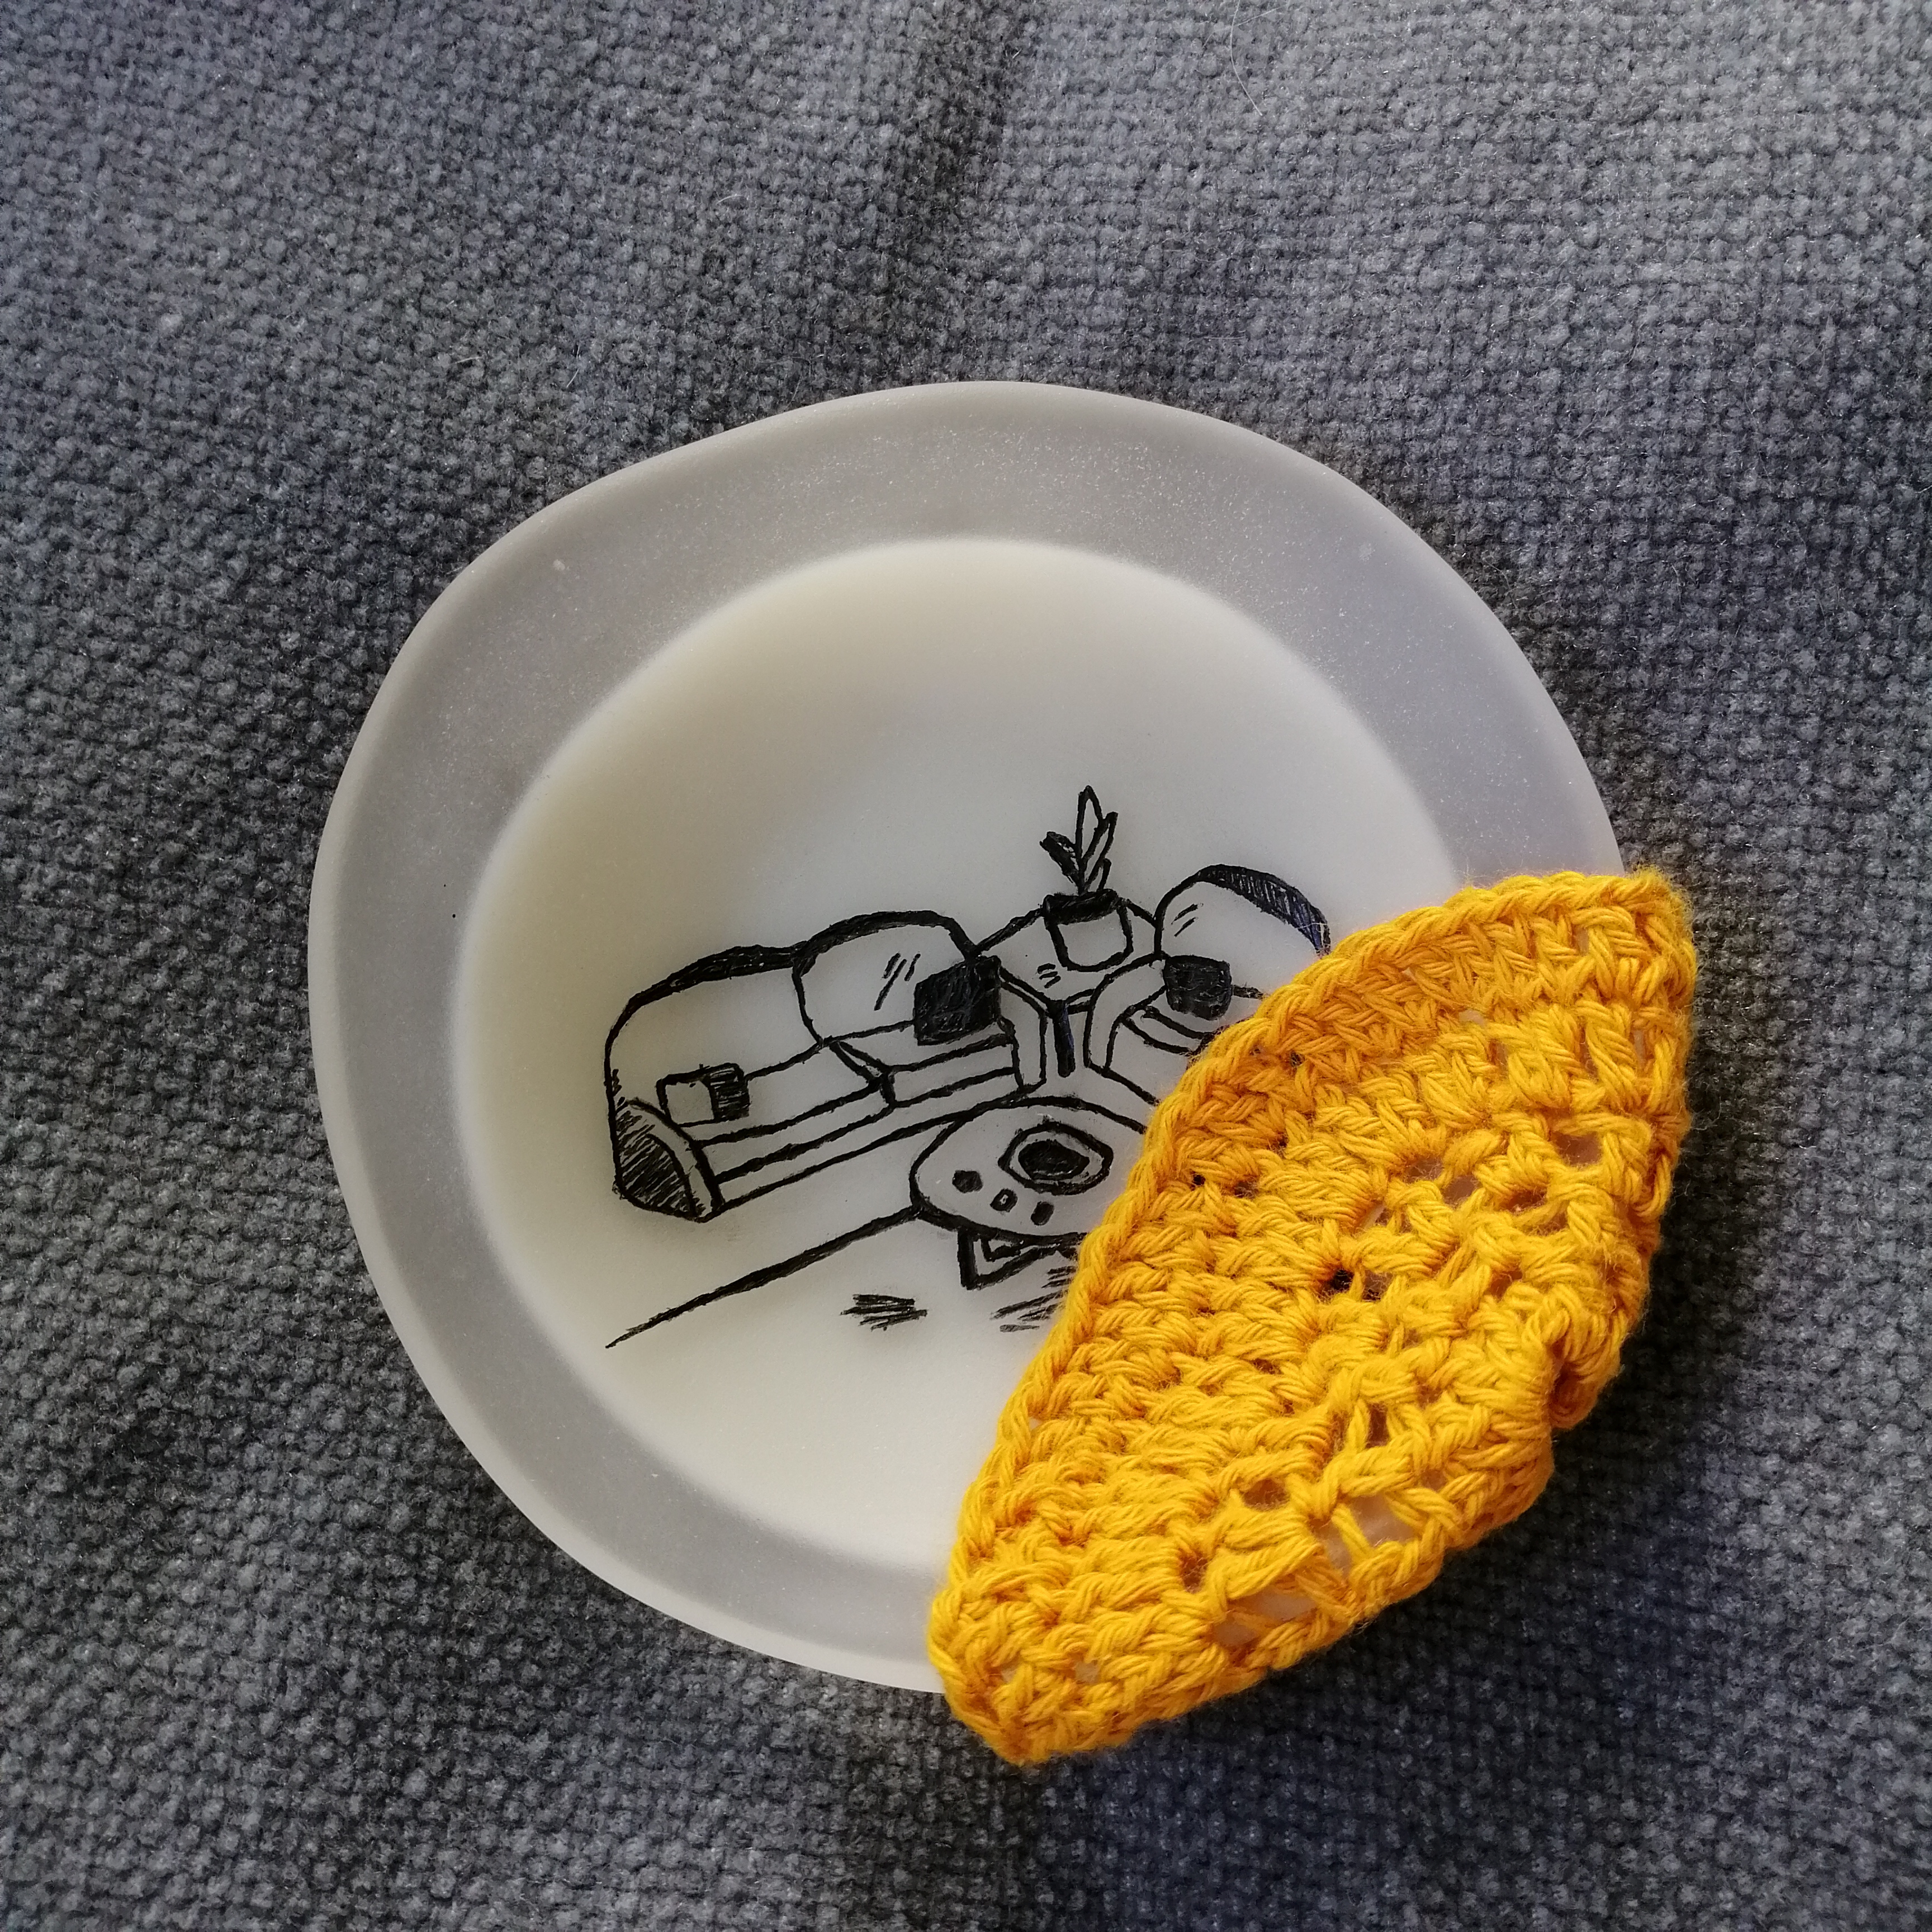 a small glass dish with a crocheted hat. The dish is colourful and has a yellow house inked into the front